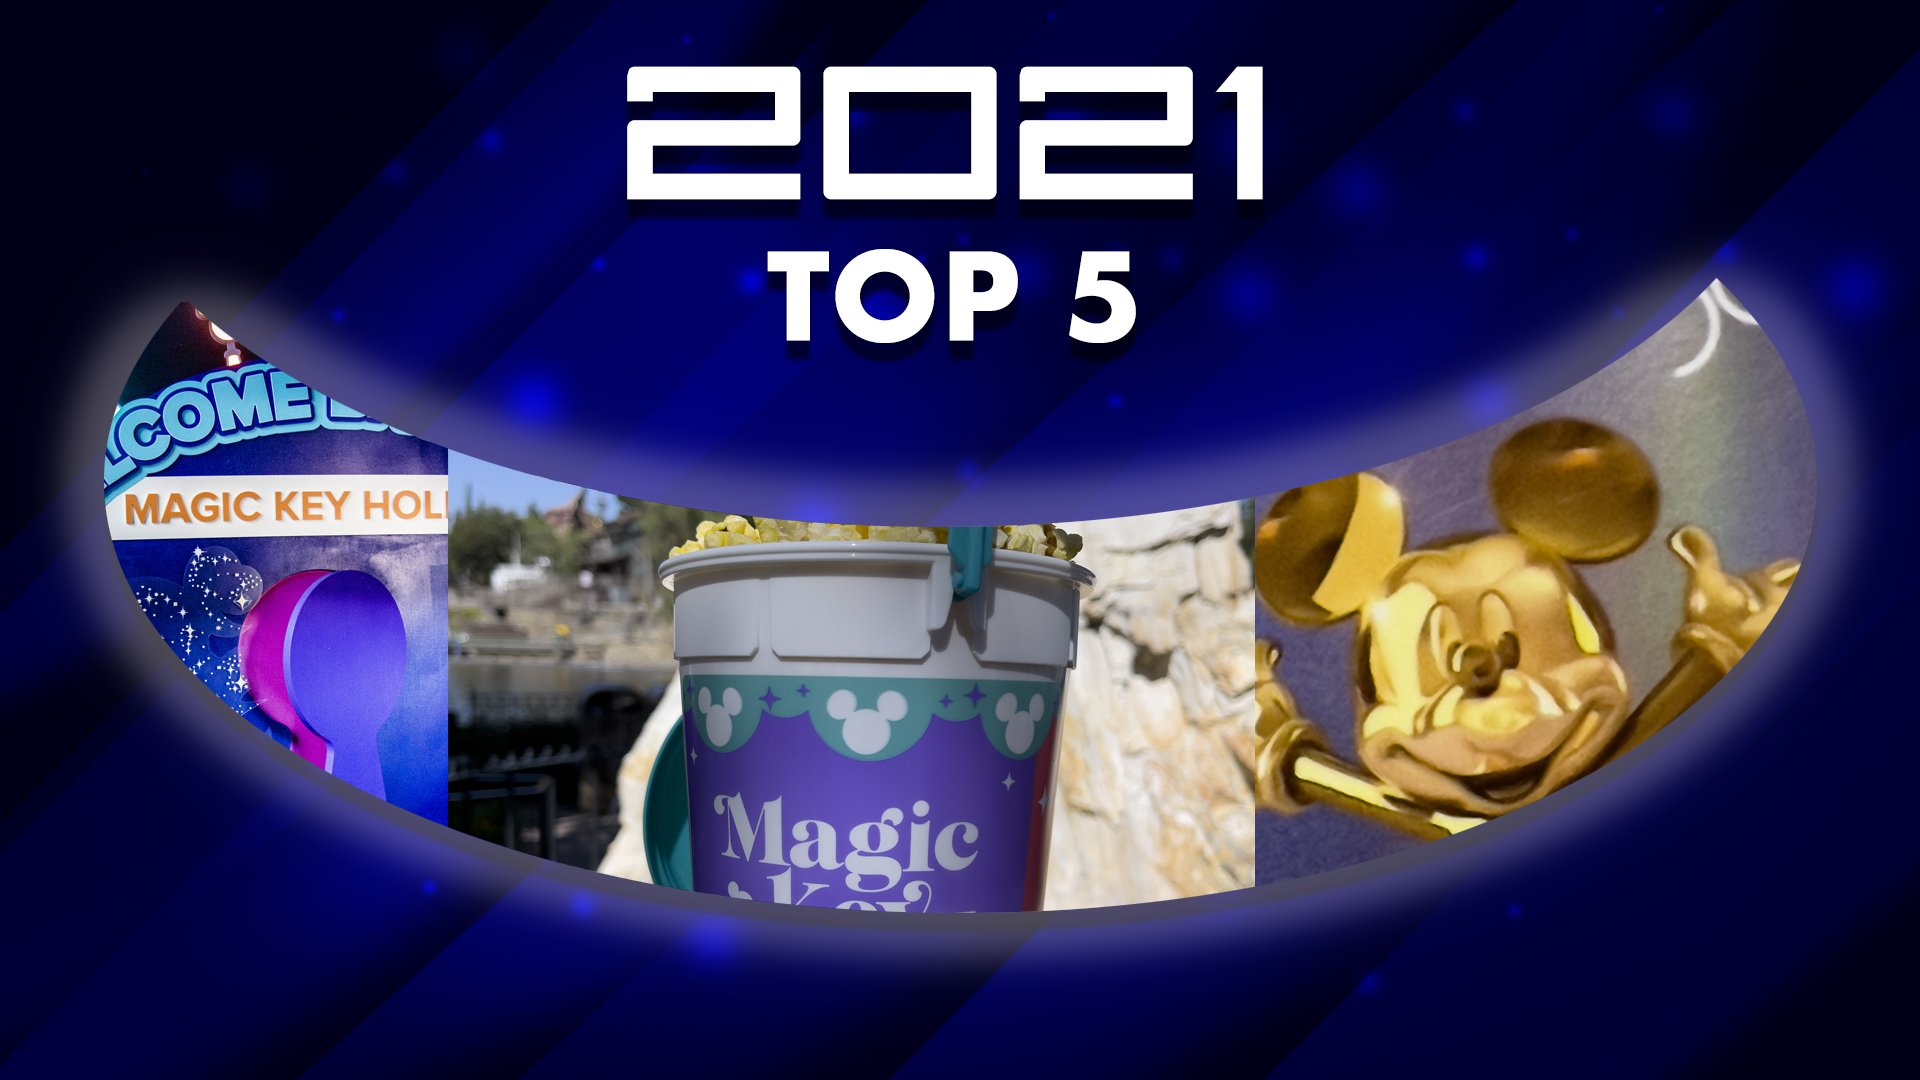 #3 – Annual Passes on Both Coasts – Top 5 Good News Disney Stories of 2021